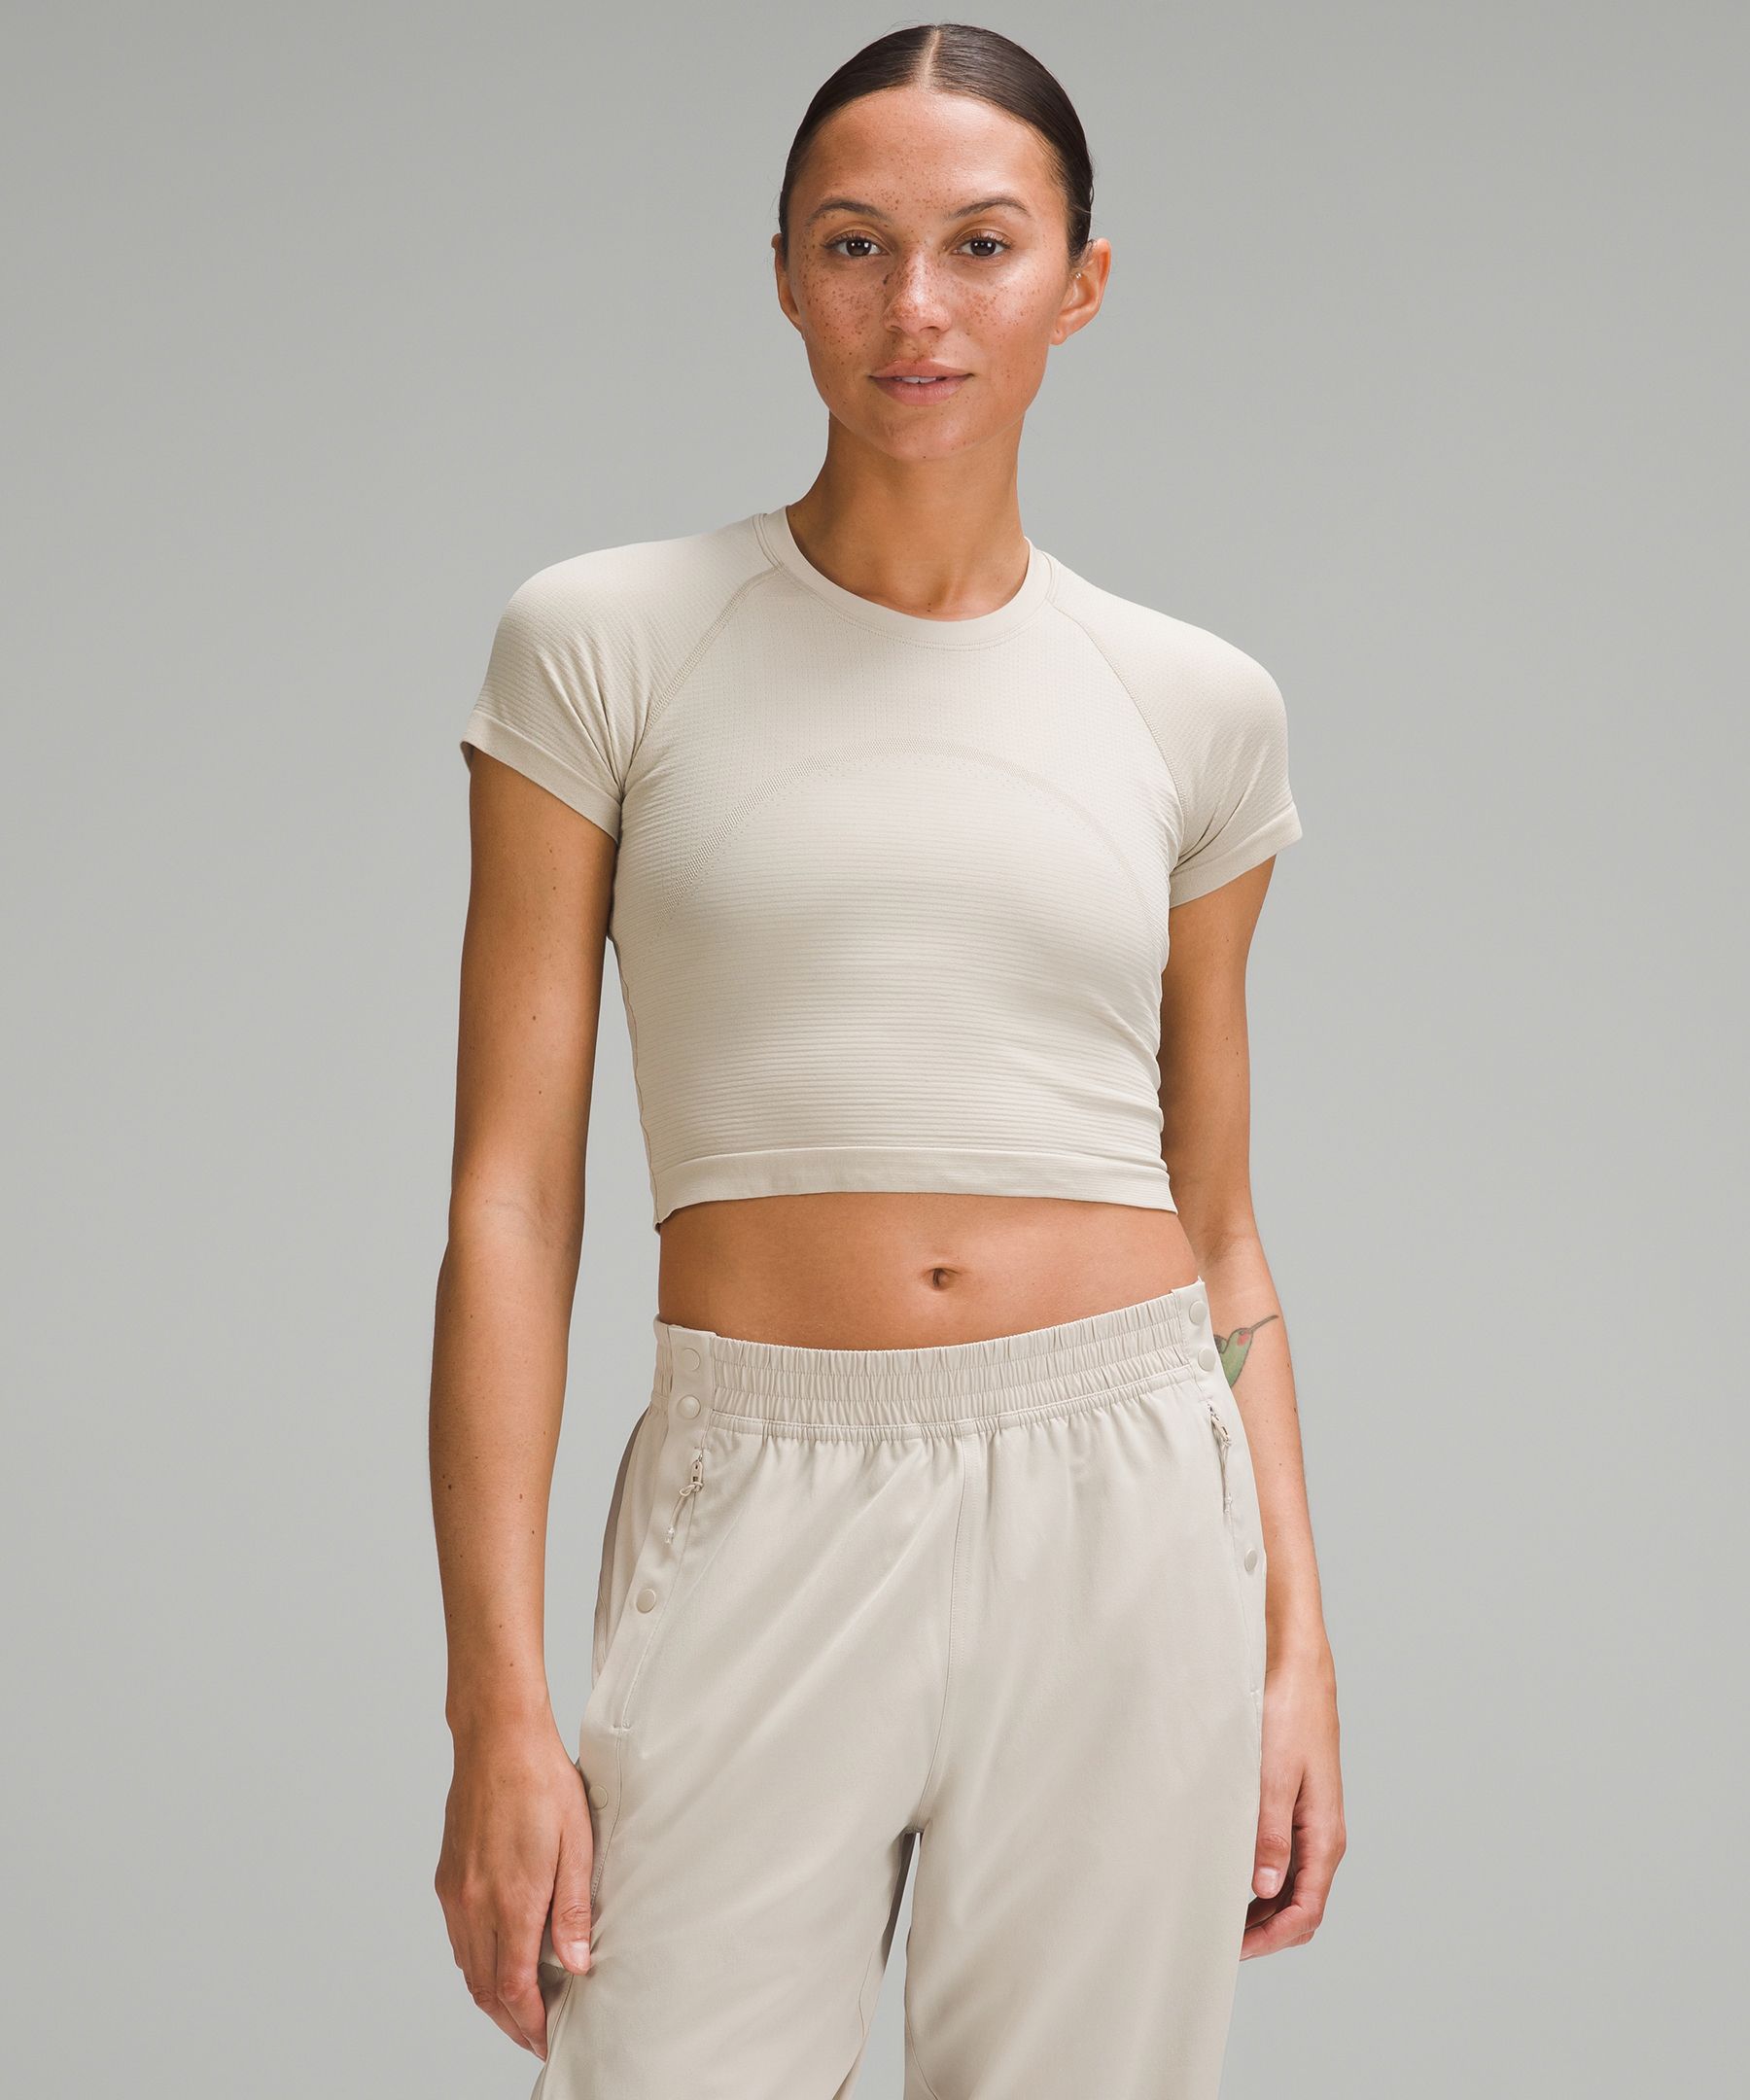 Lululemon Swiftly Tech Cropped Short-sleeve Shirt 2.0 In Neutral